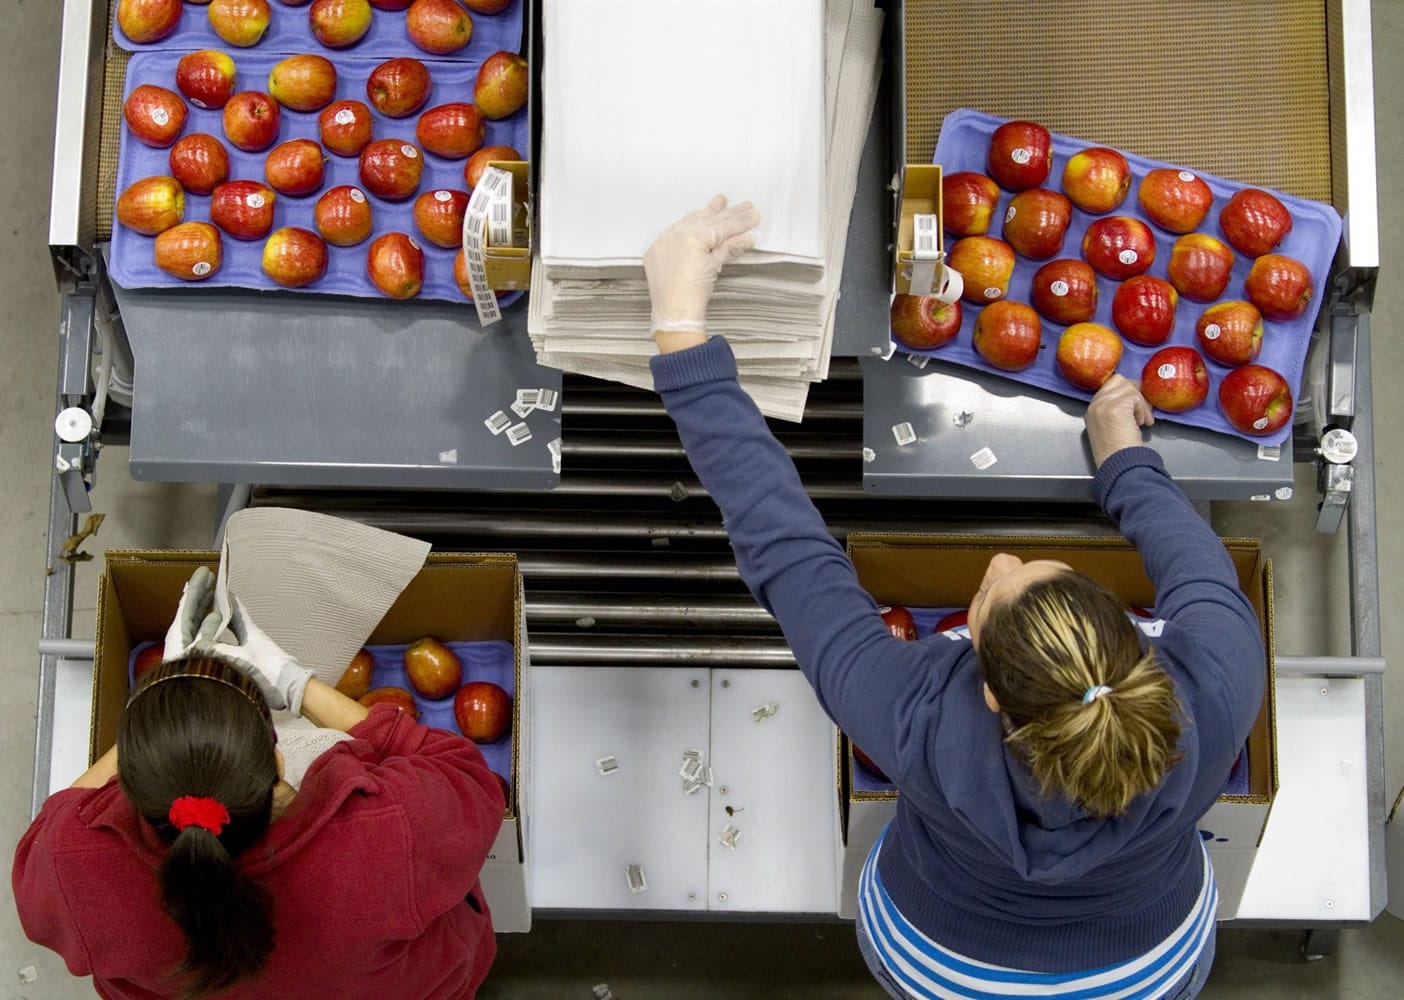 Apples are packed into boxes before they are shipped from Washington Fruit &amp; Produce Co.